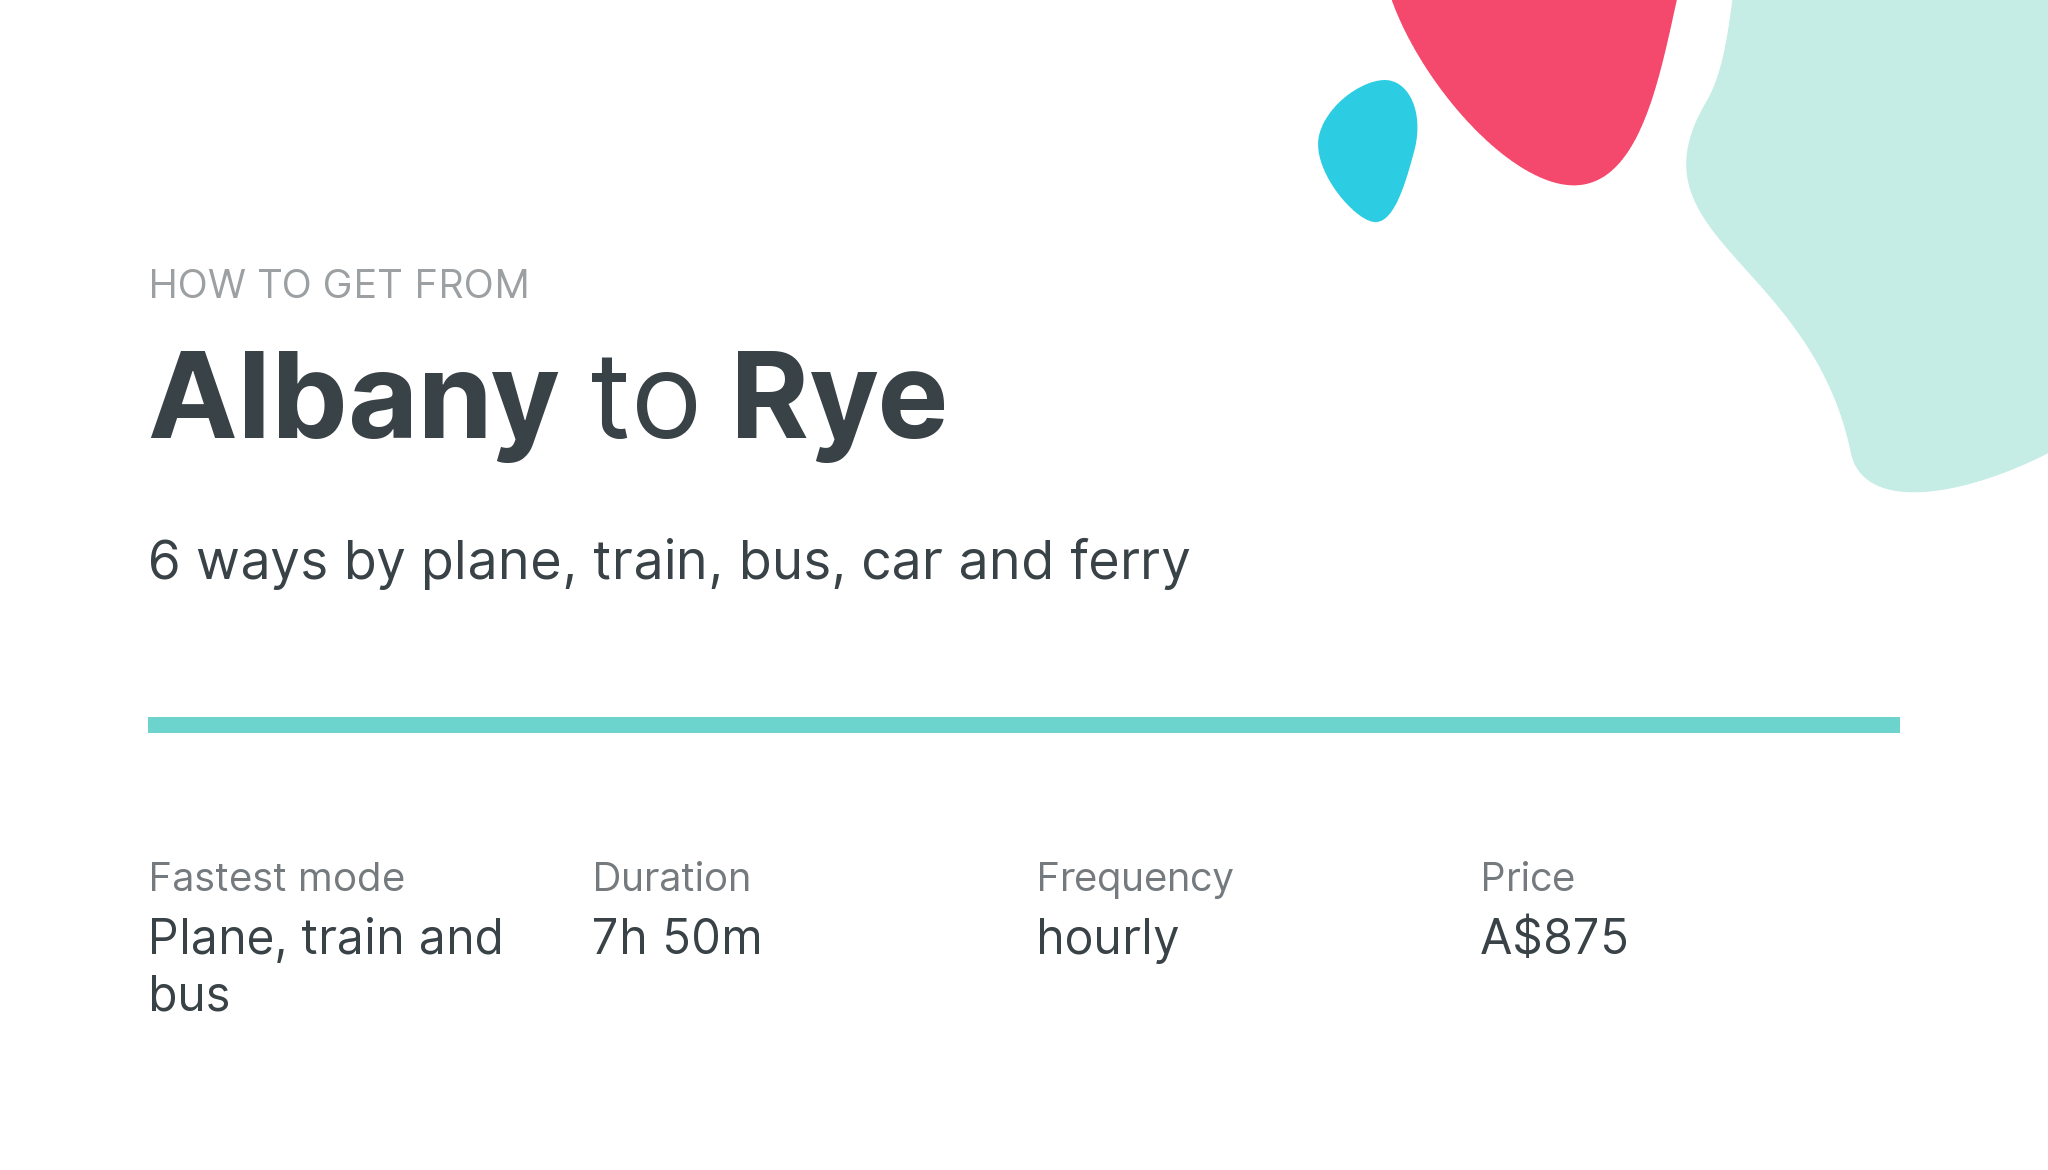 How do I get from Albany to Rye